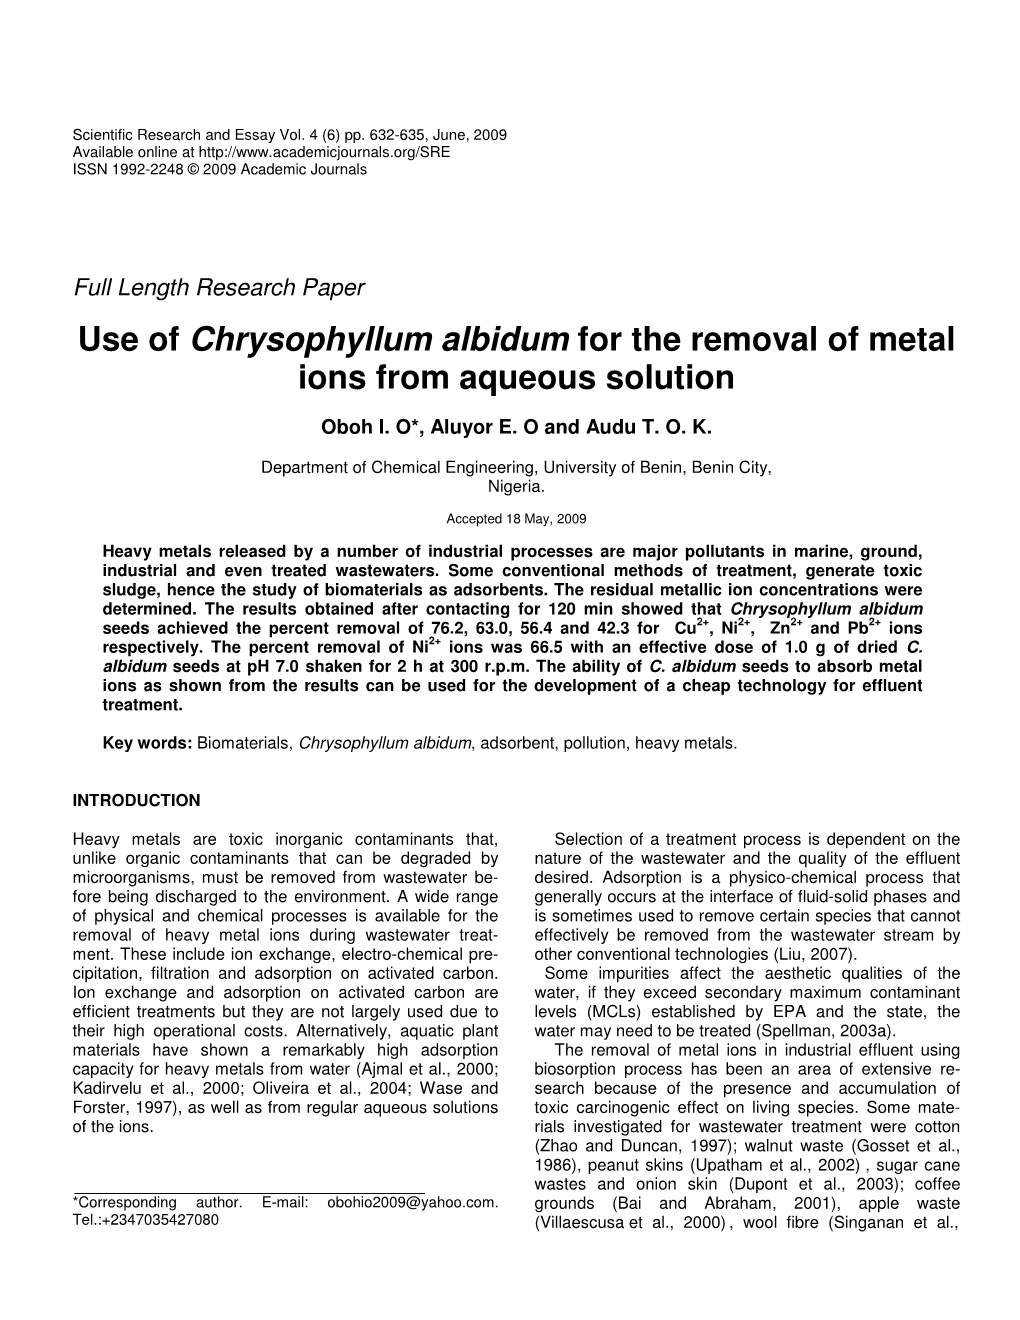 Use of Chrysophyllum Albidum for the Removal of Metal Ions from Aqueous Solution